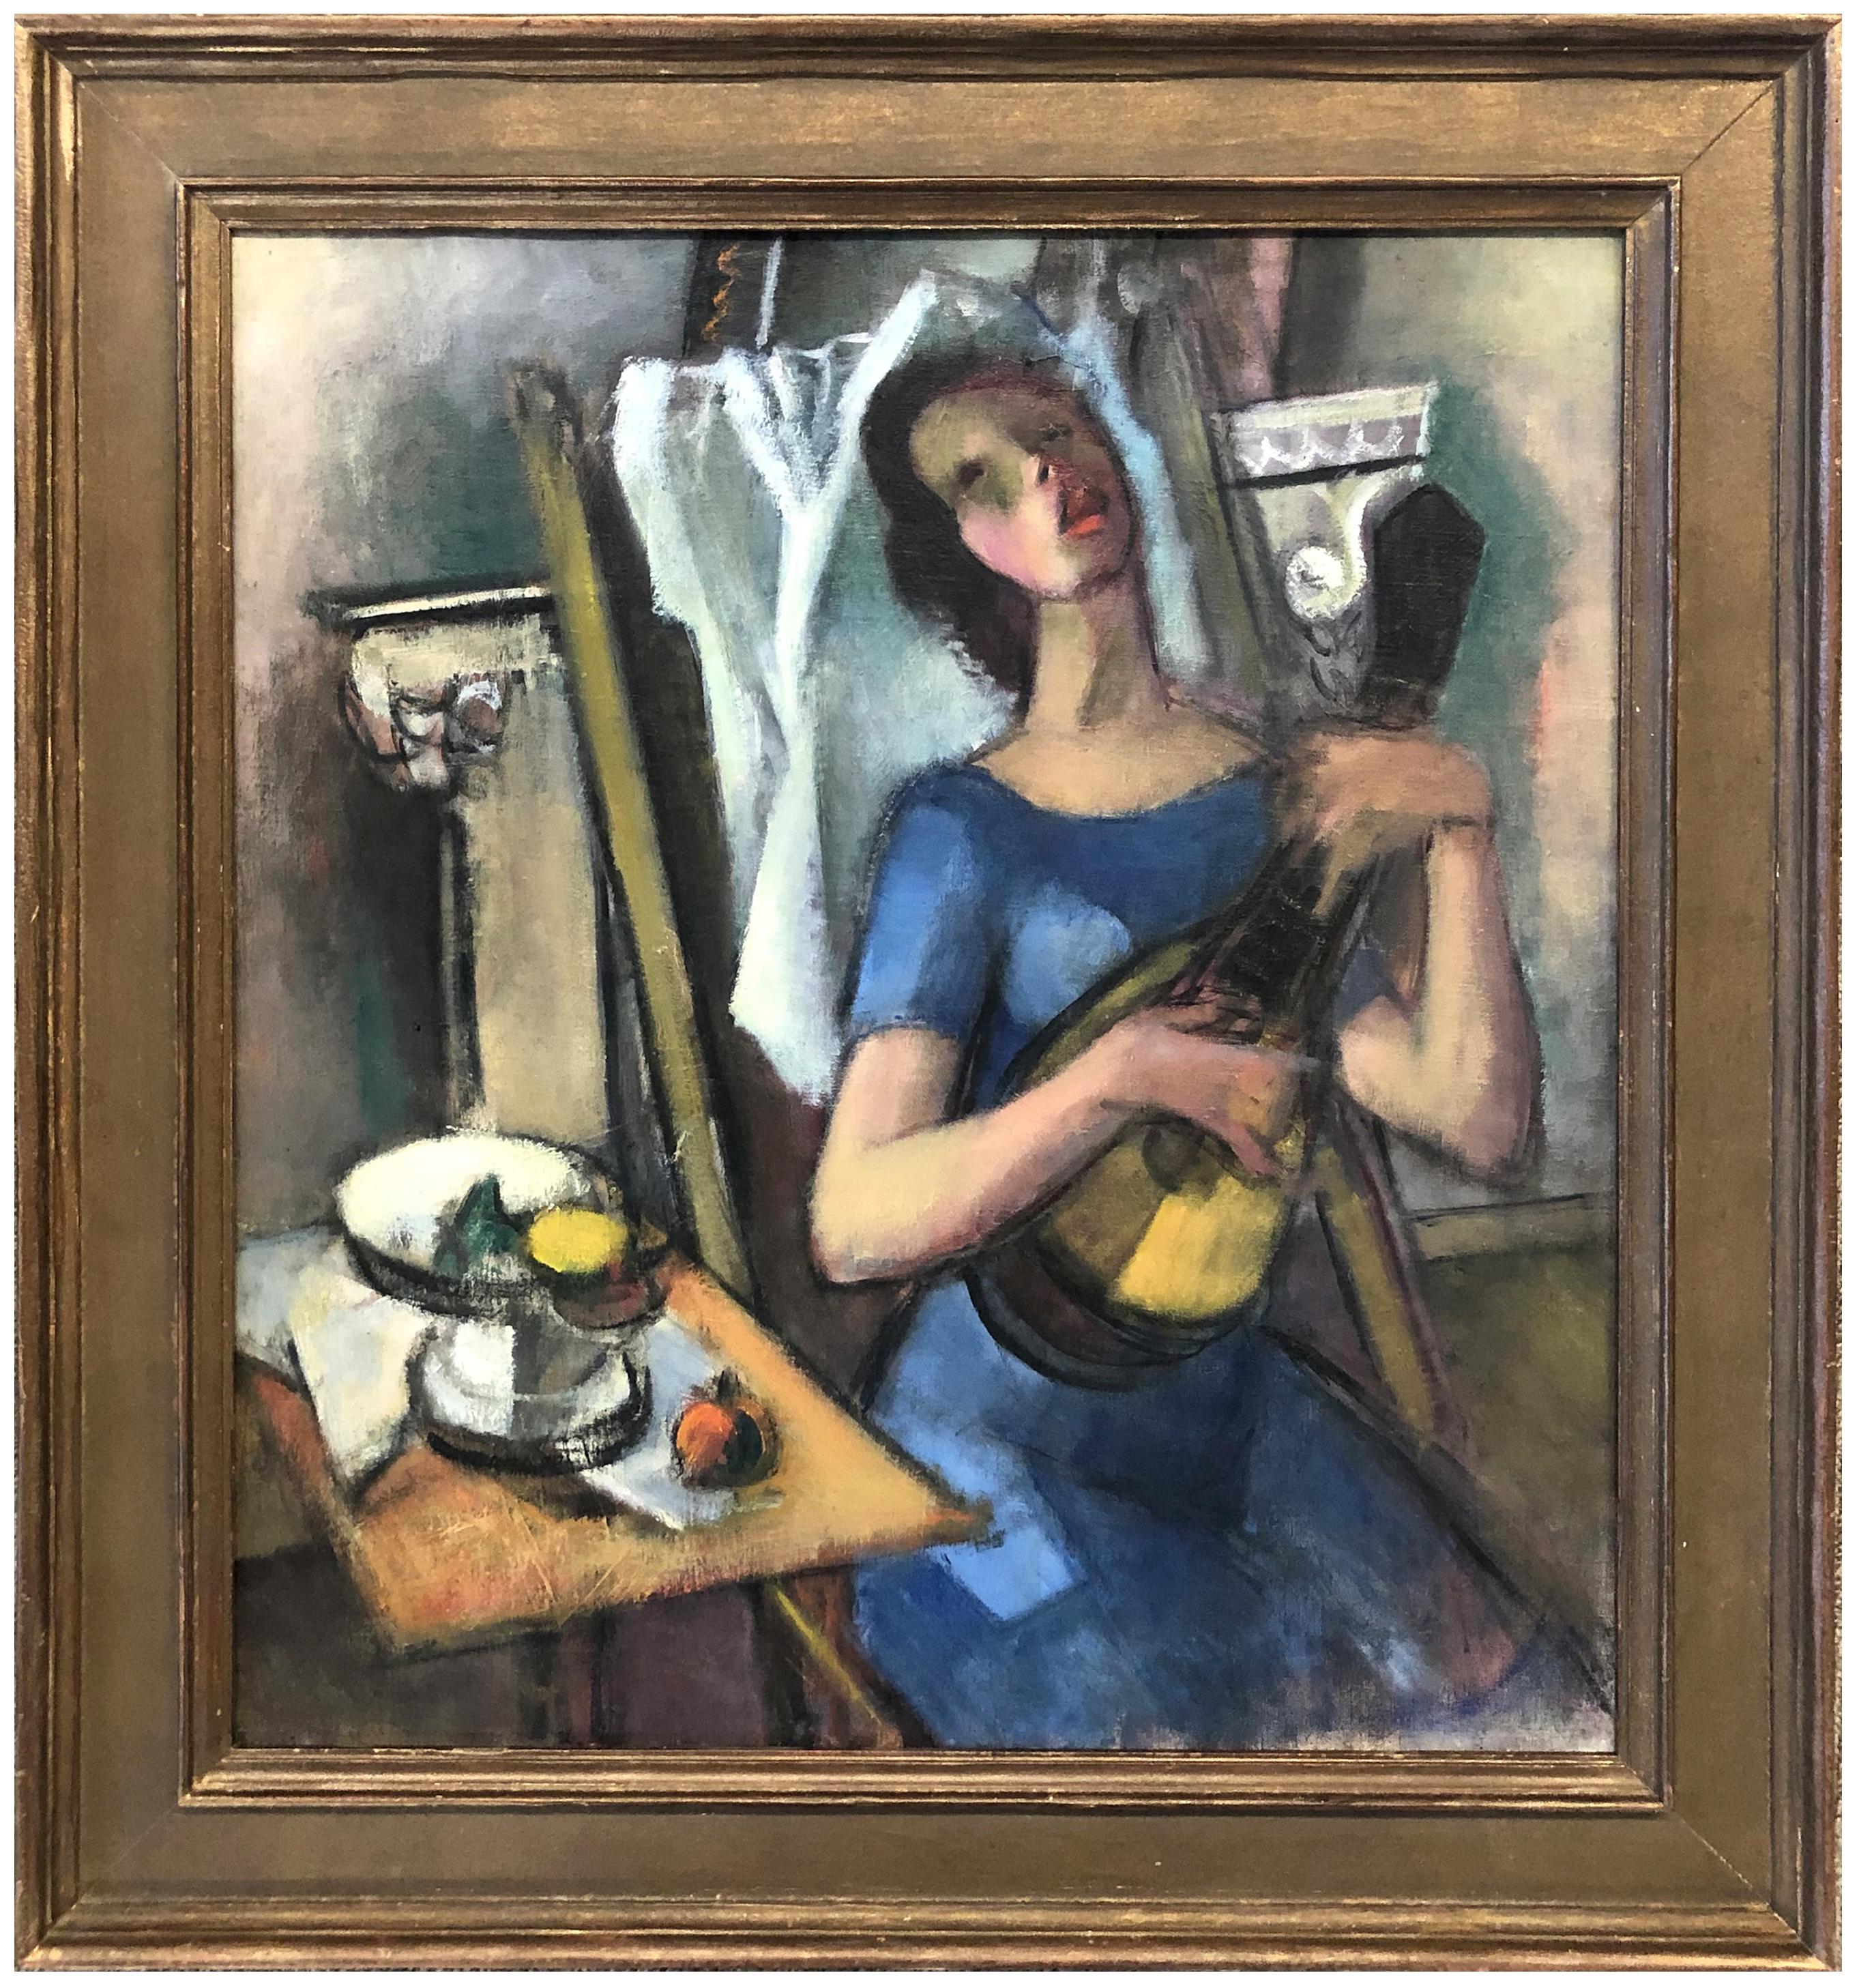 Woman with a Guitar, Cubism